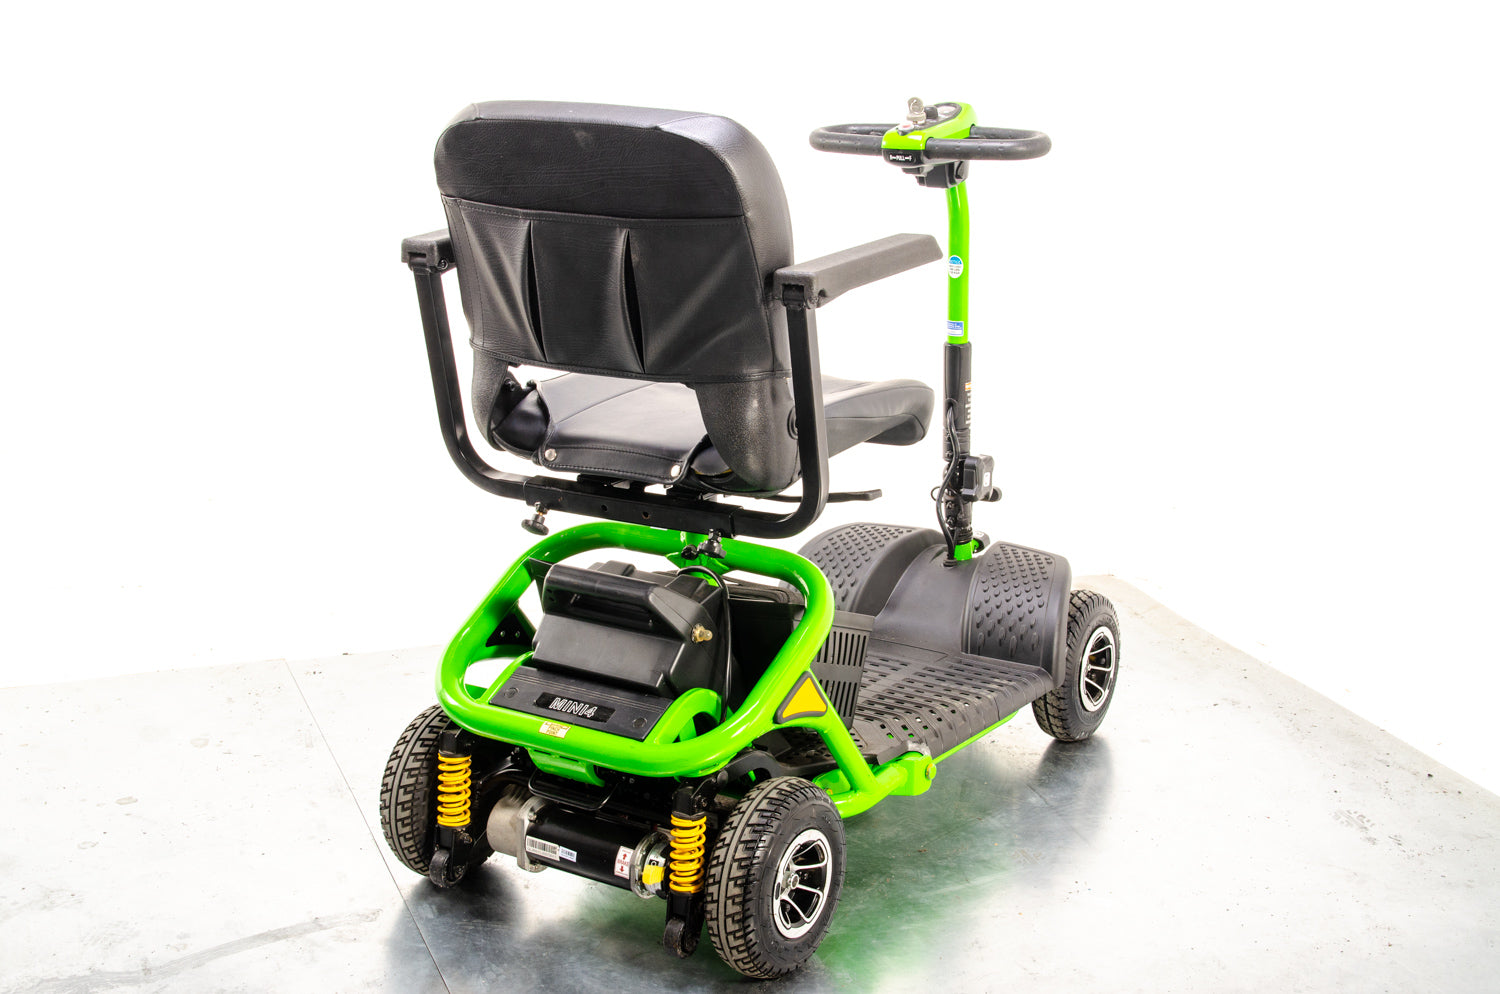 Monarch Mini 4 Plus Used Mobility Scooter Small Transportable Pneumatic Tyres Parks Green 13375